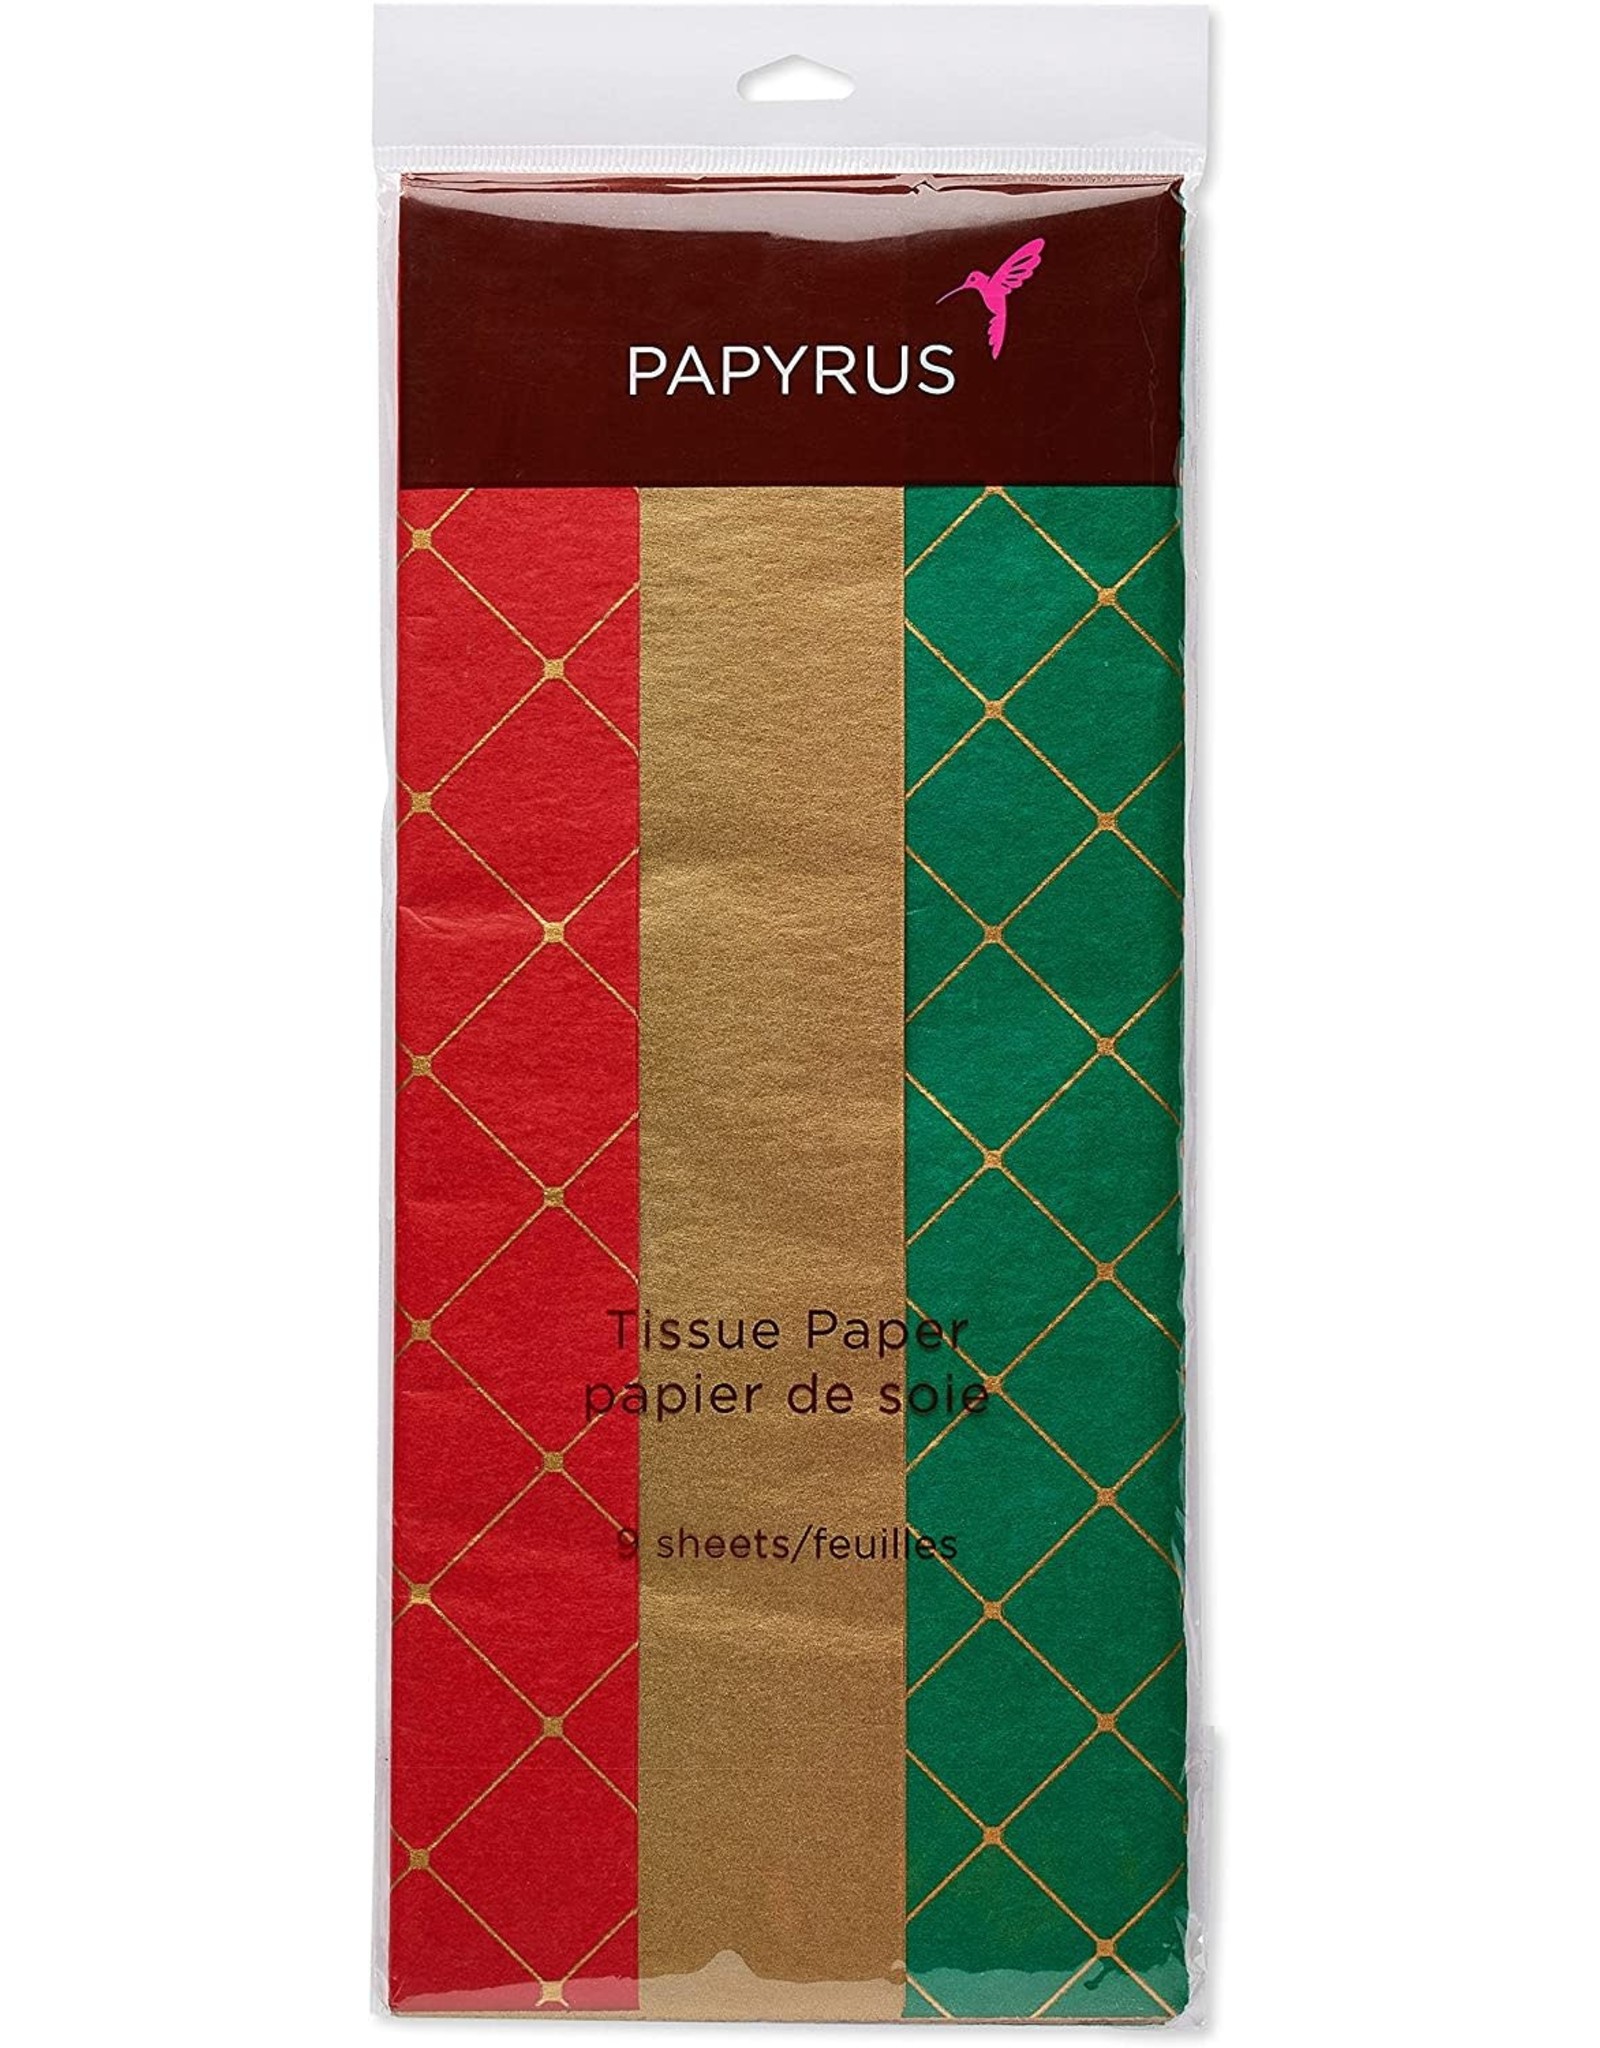 PAPYRUS® Christmas Tissue Paper 9 Sheets Trio Holiday Red Gold Green